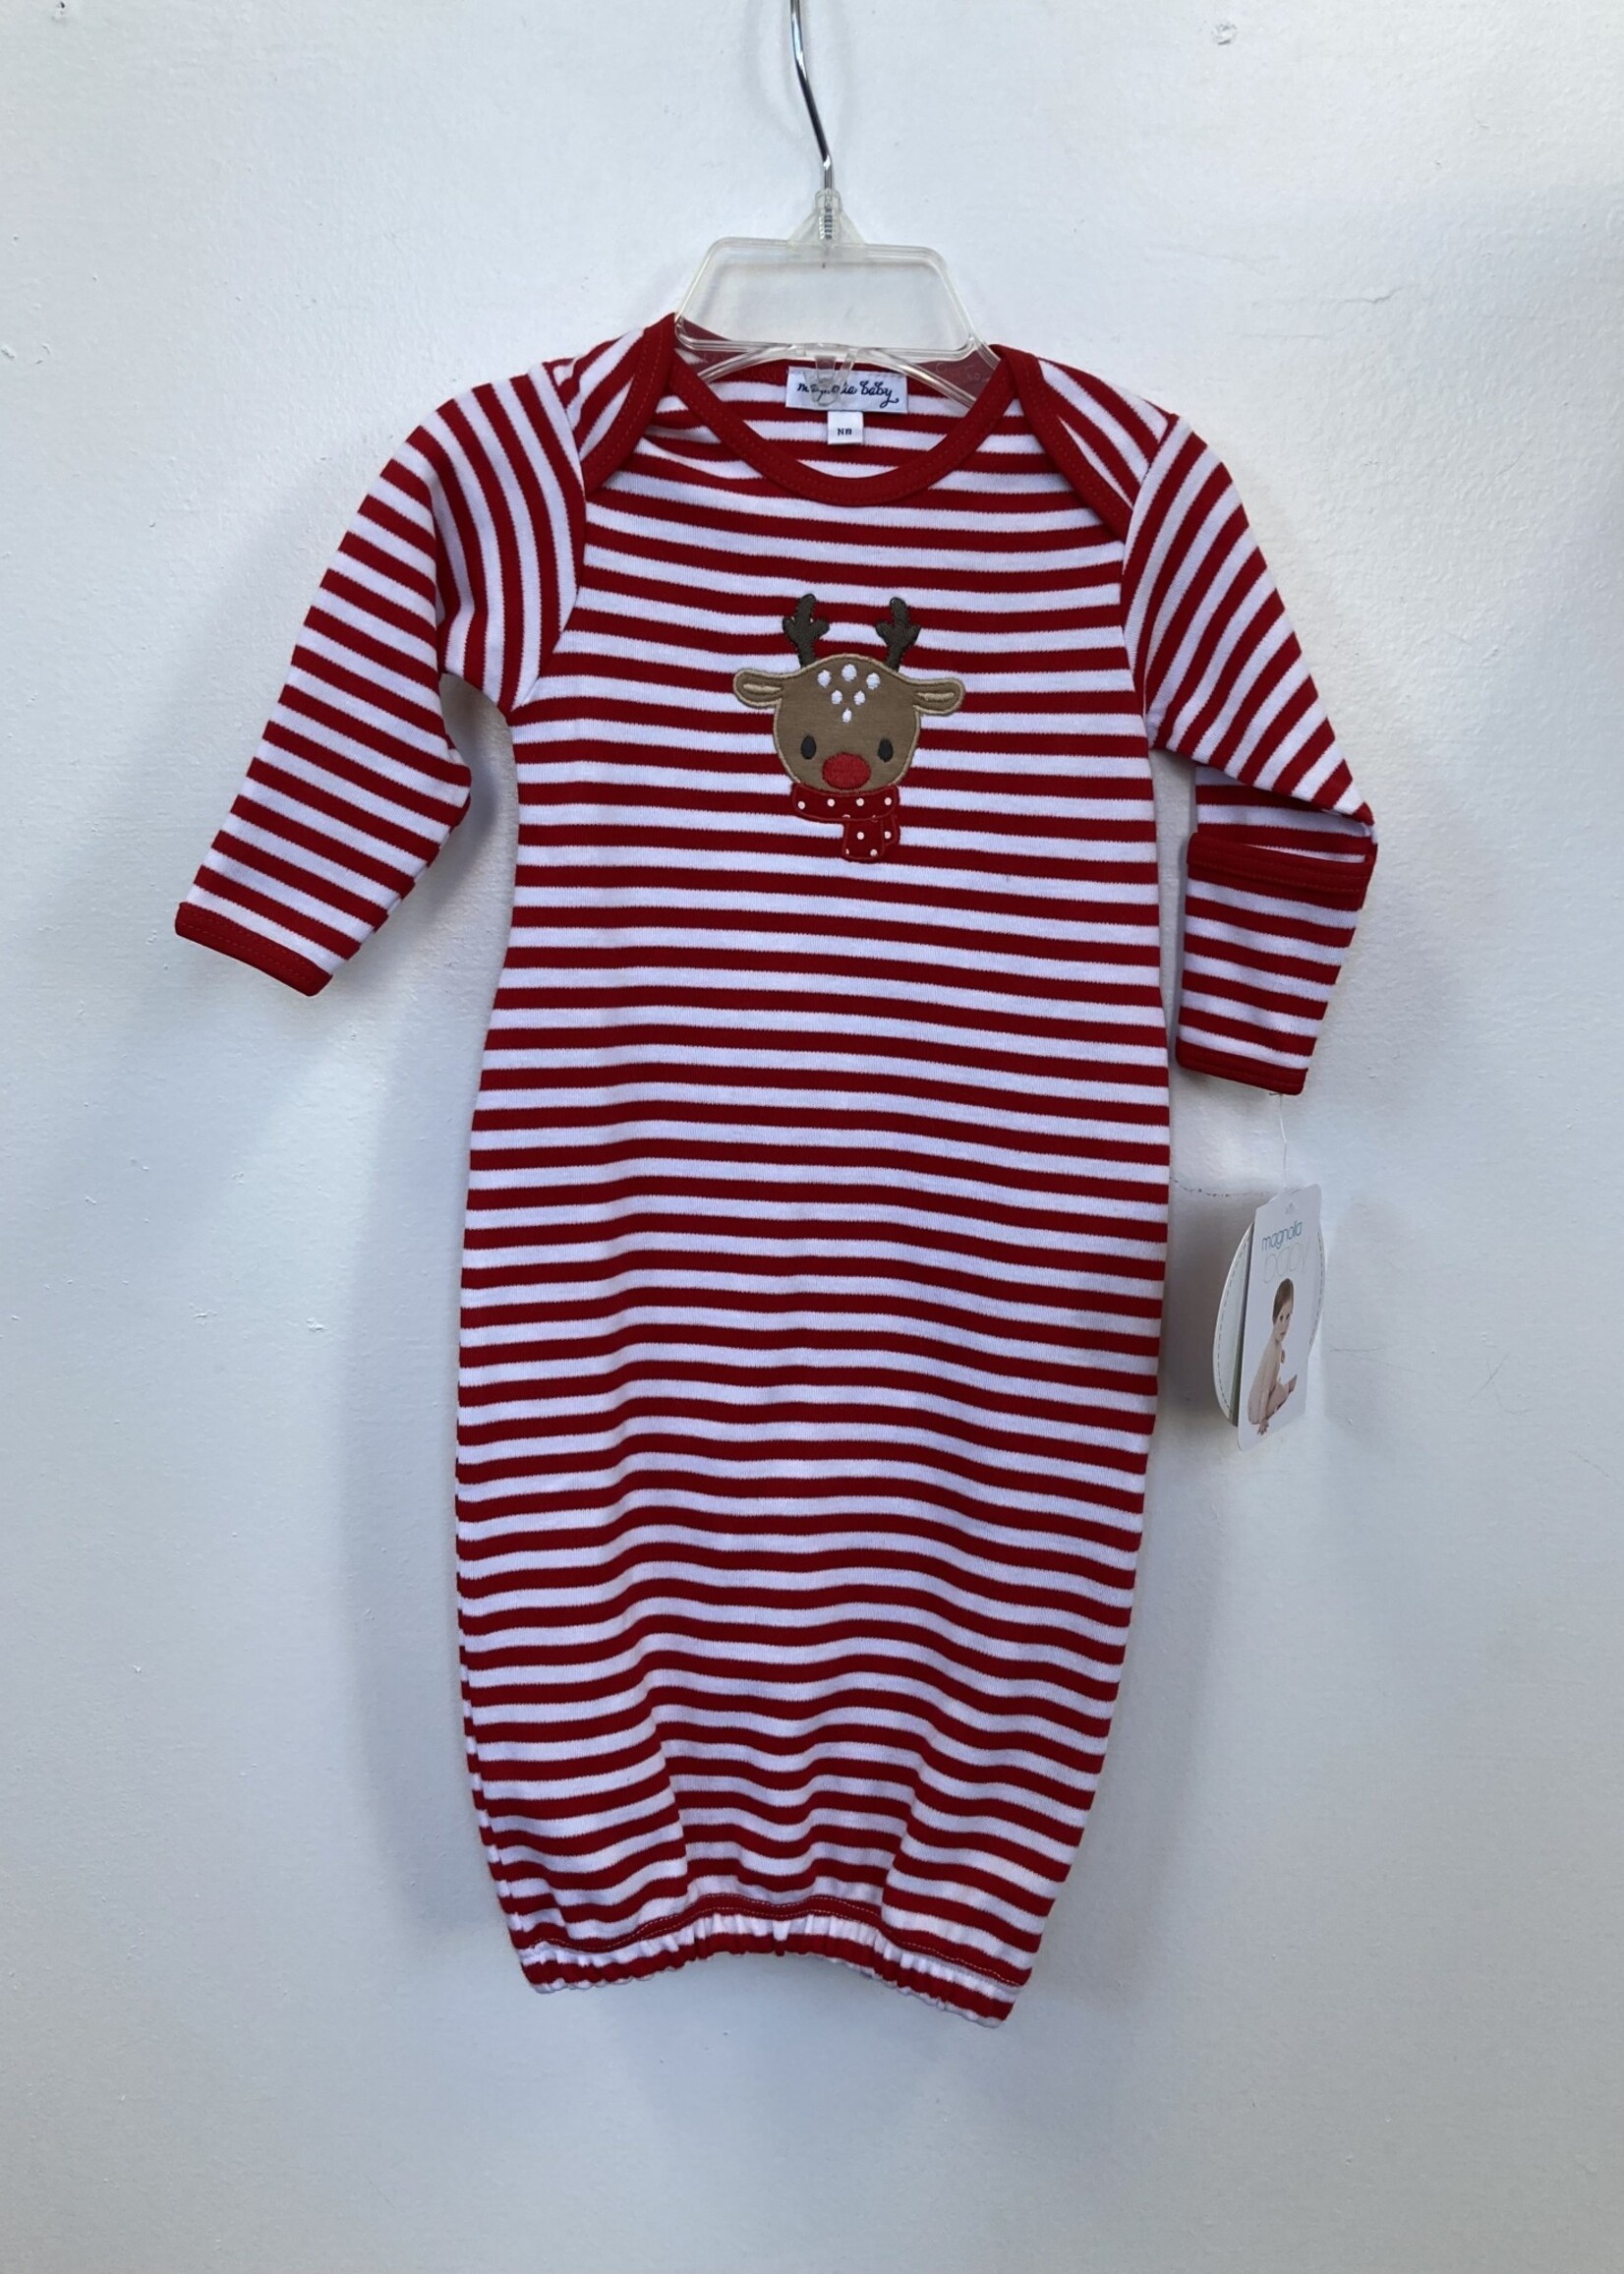 Magnolia Baby Red/White Striped Gown w/Reindeer NB